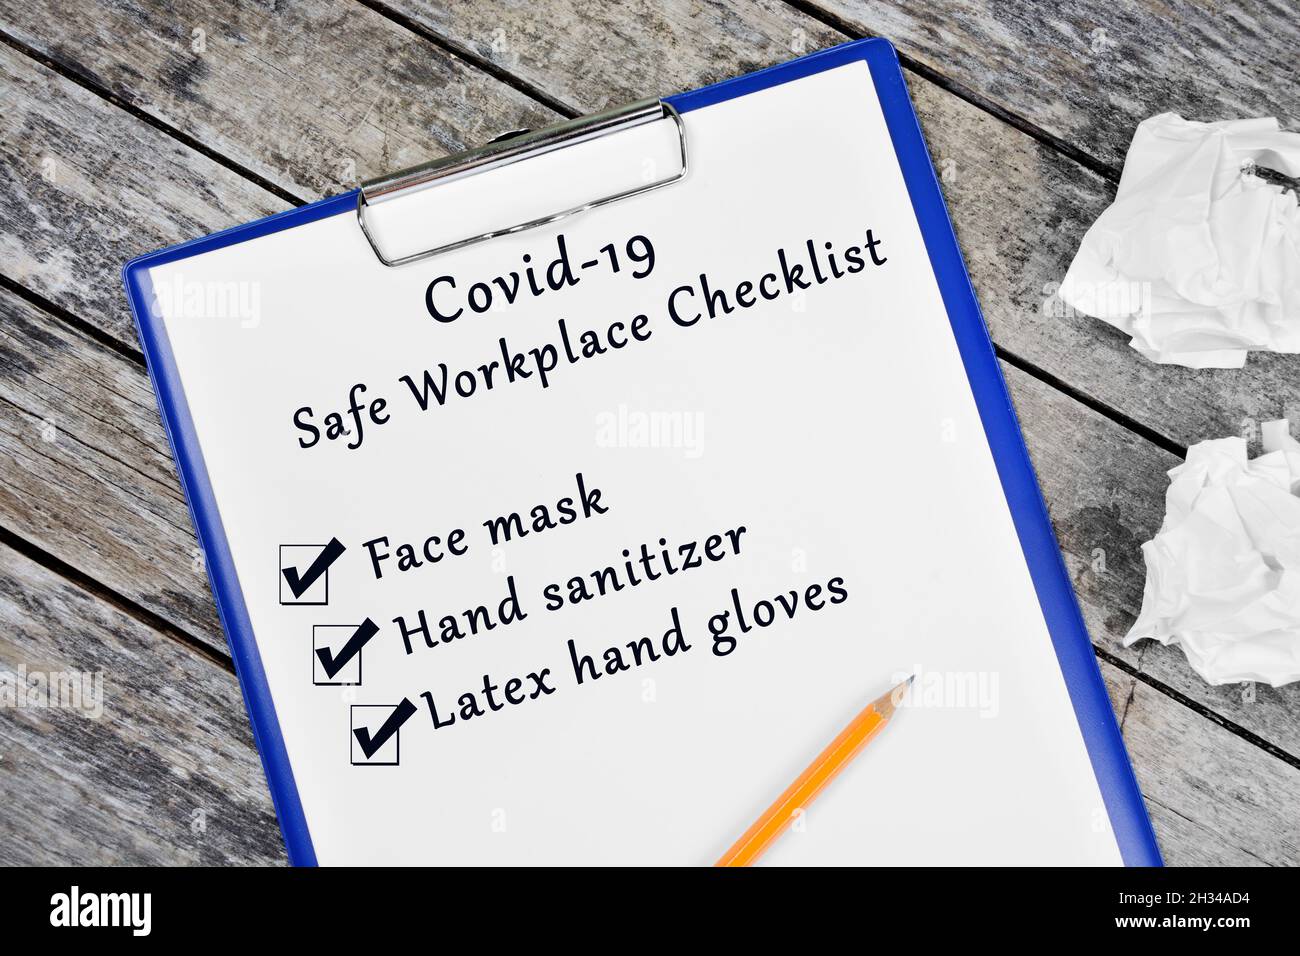 Covid 19 Safe workplace written on paper Stock Photo